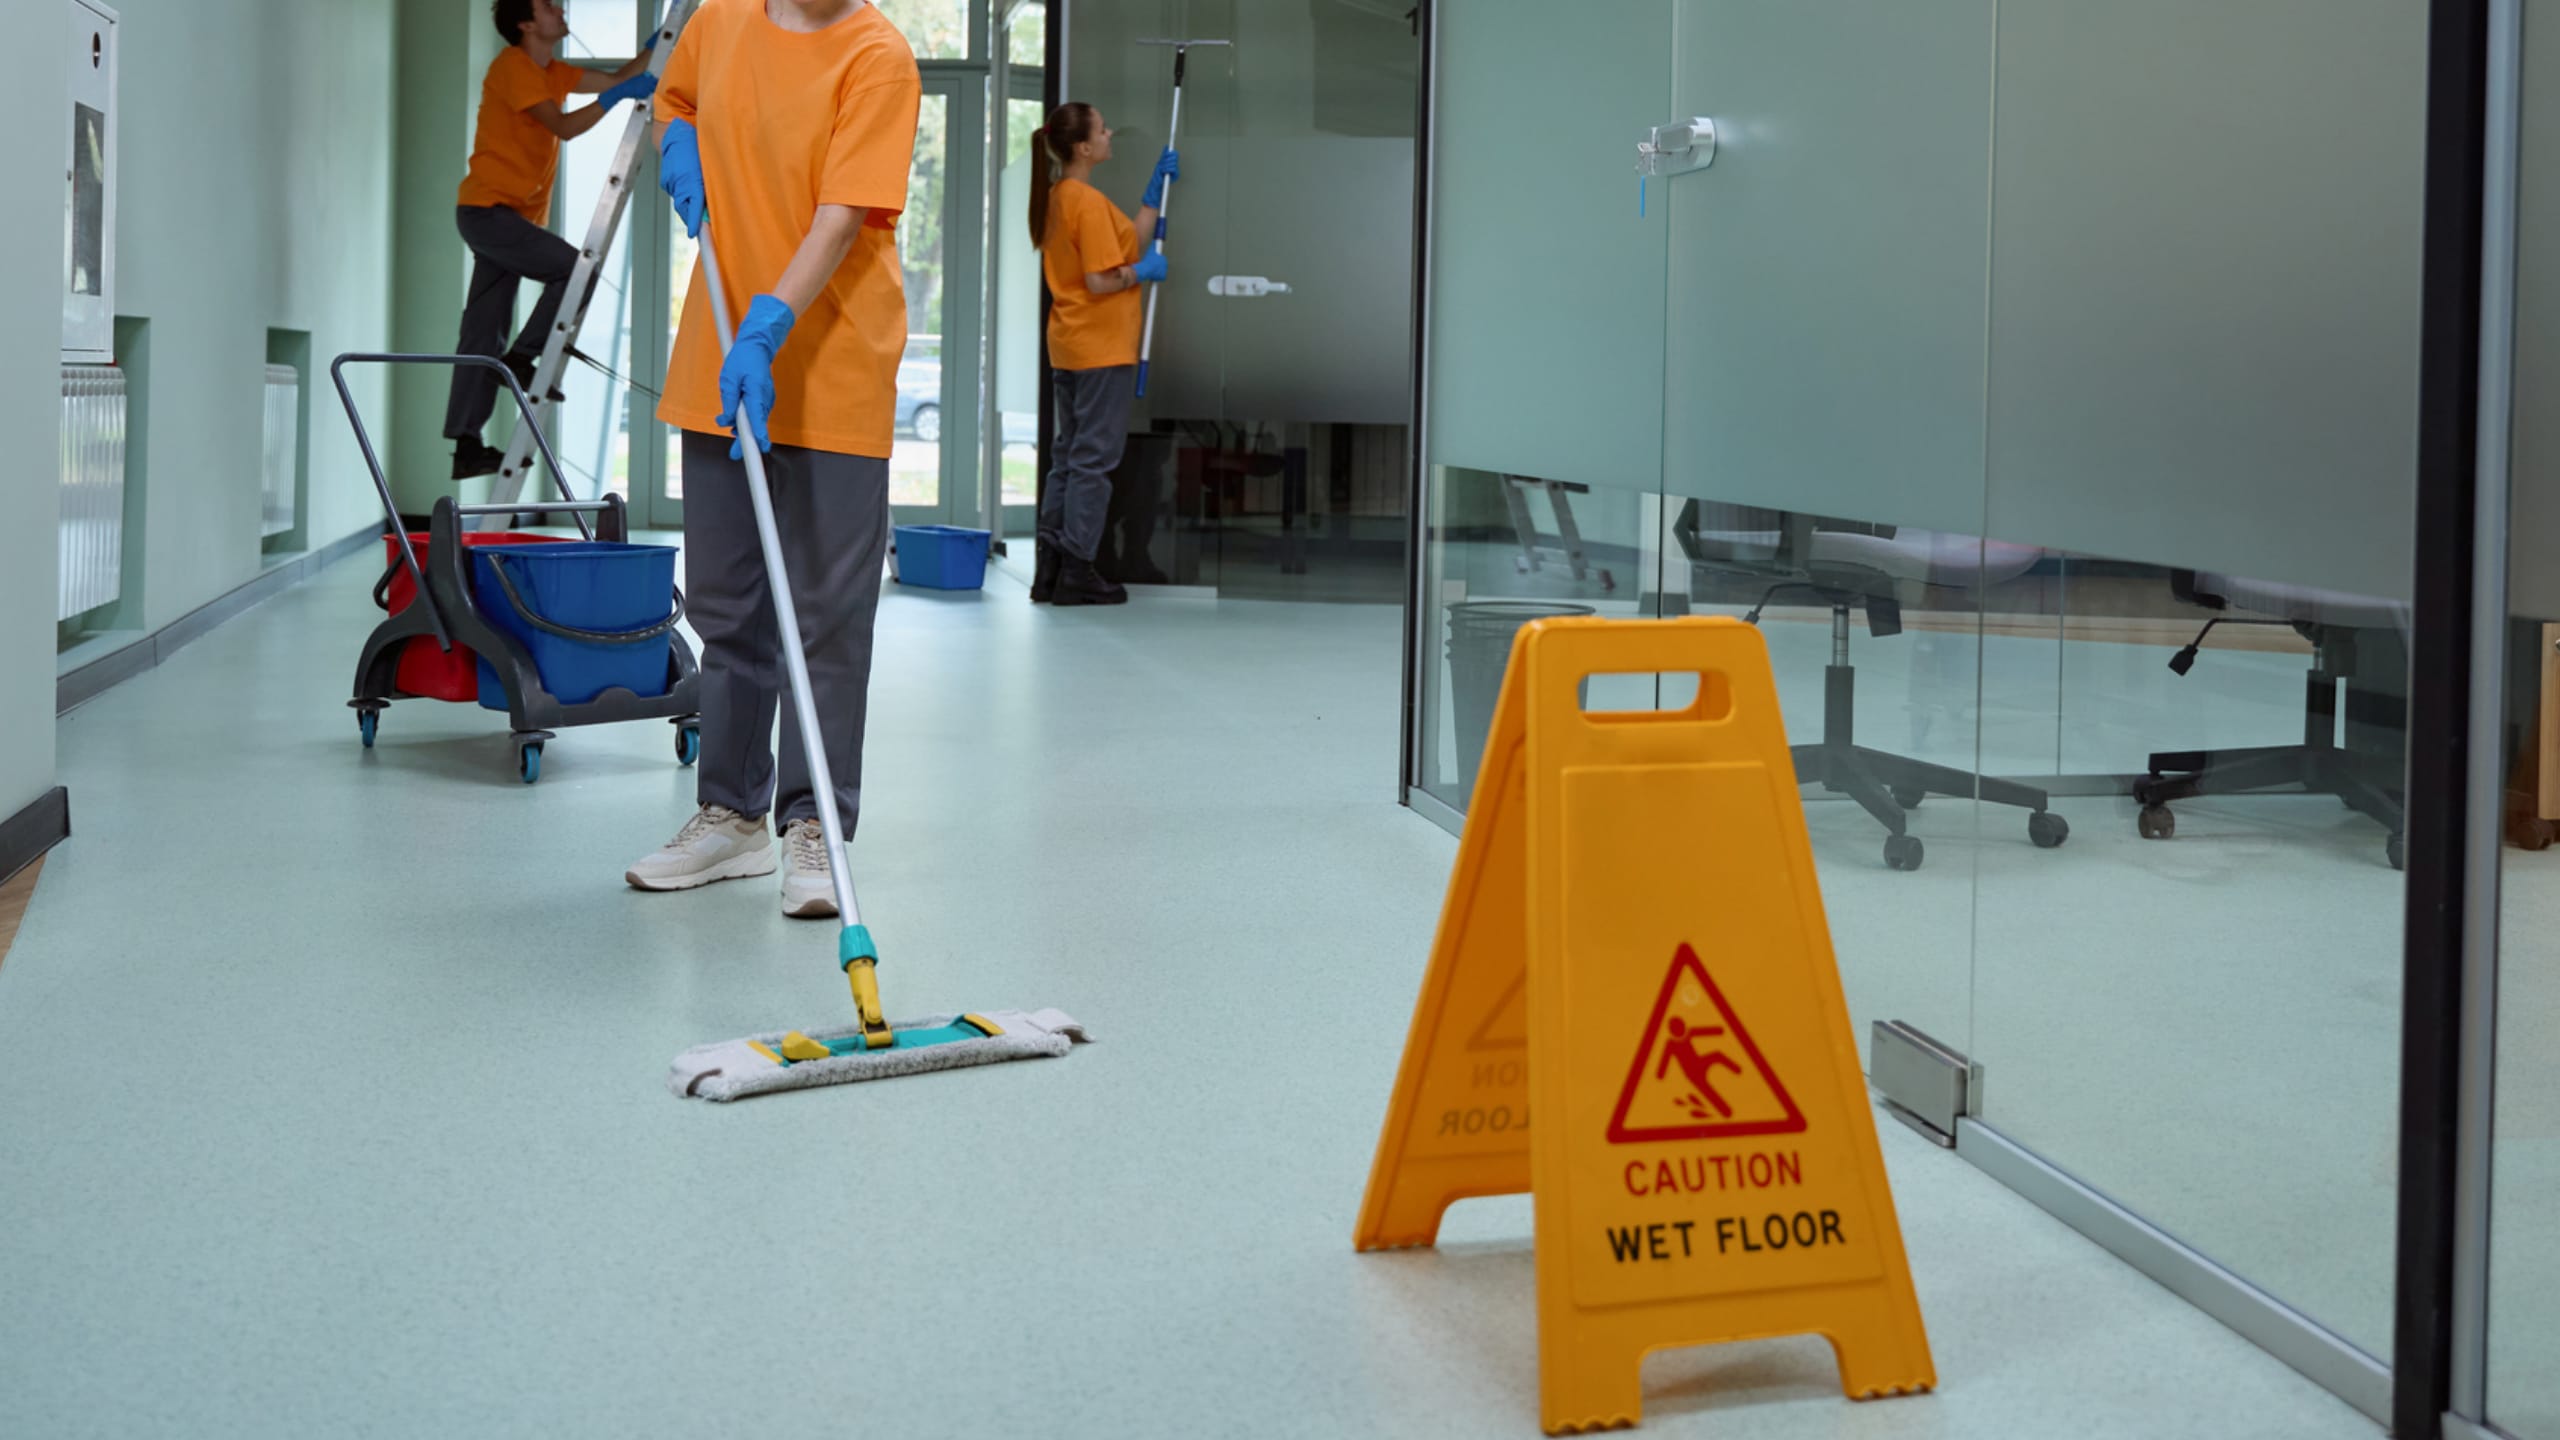 kleenmark commercial cleaning solutions